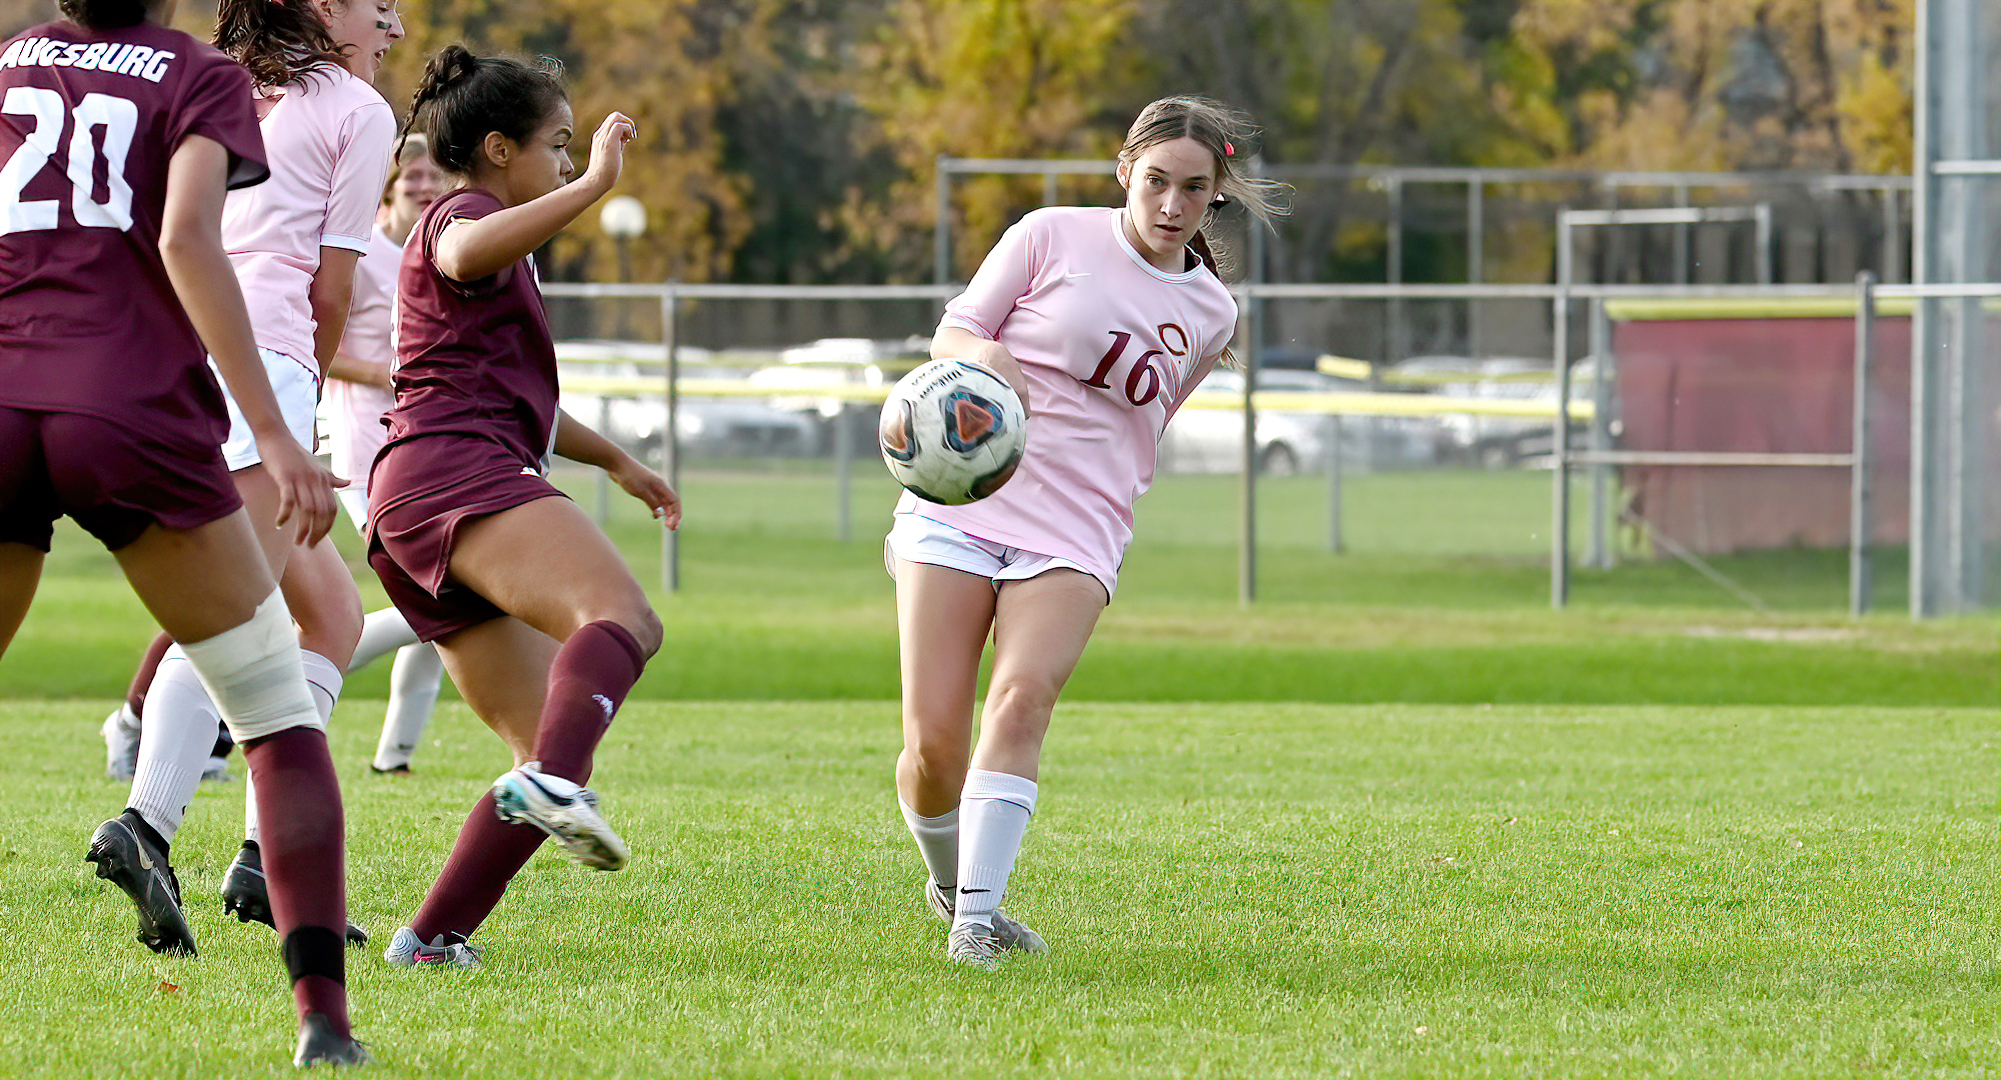 Kara Ellis makes a pass up the field during the Cobbers' win over Augsburg. She scored the game-winning goal in the first half.